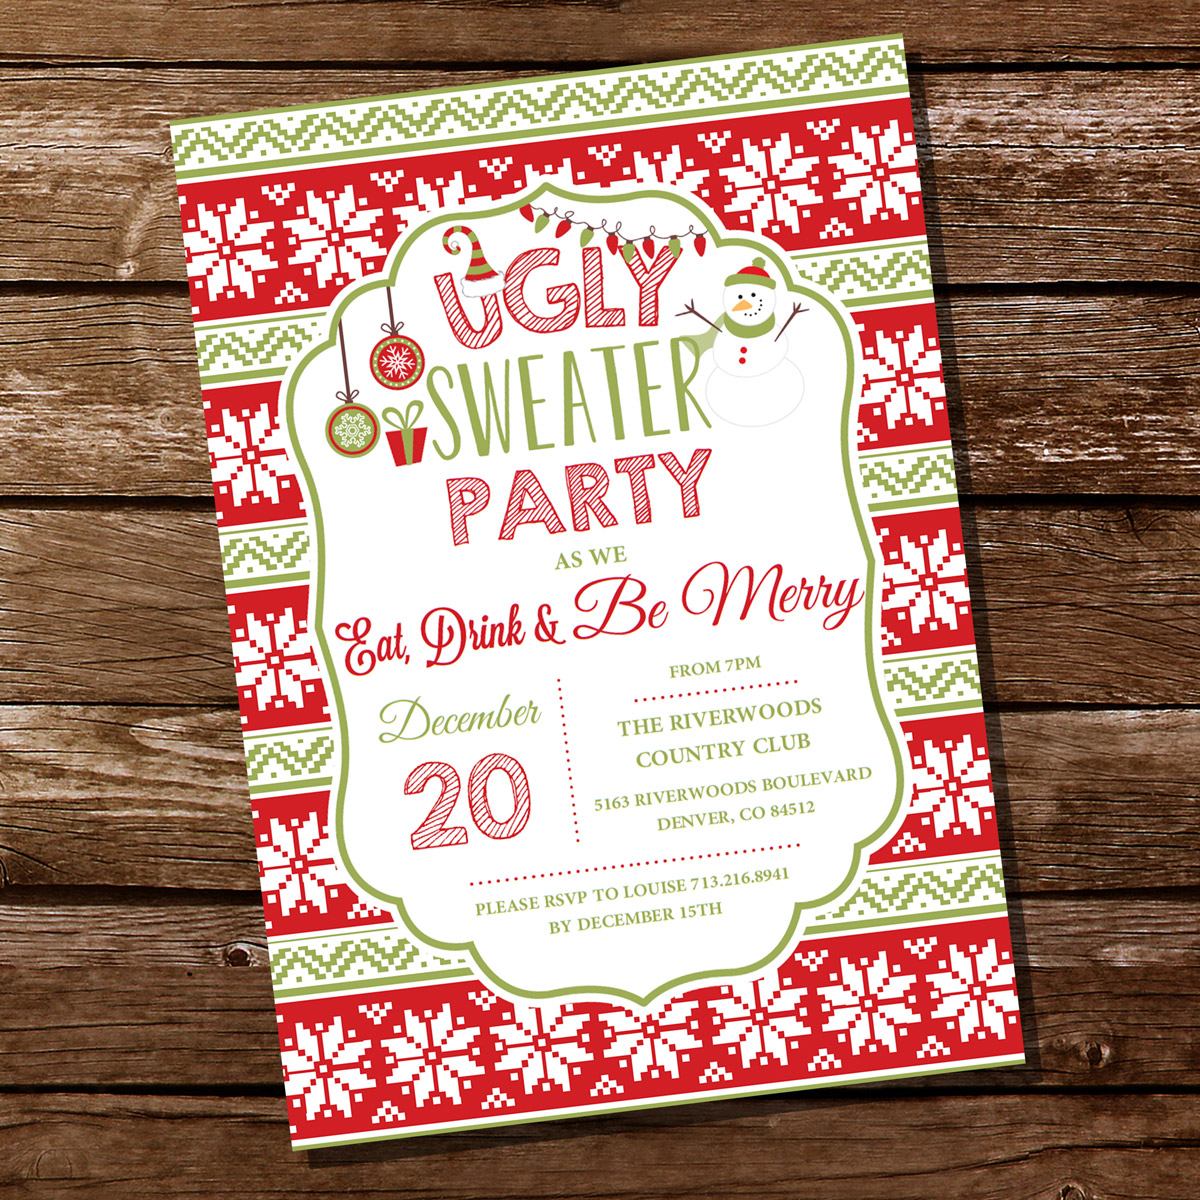 gle Sweater Christmas party Invitation